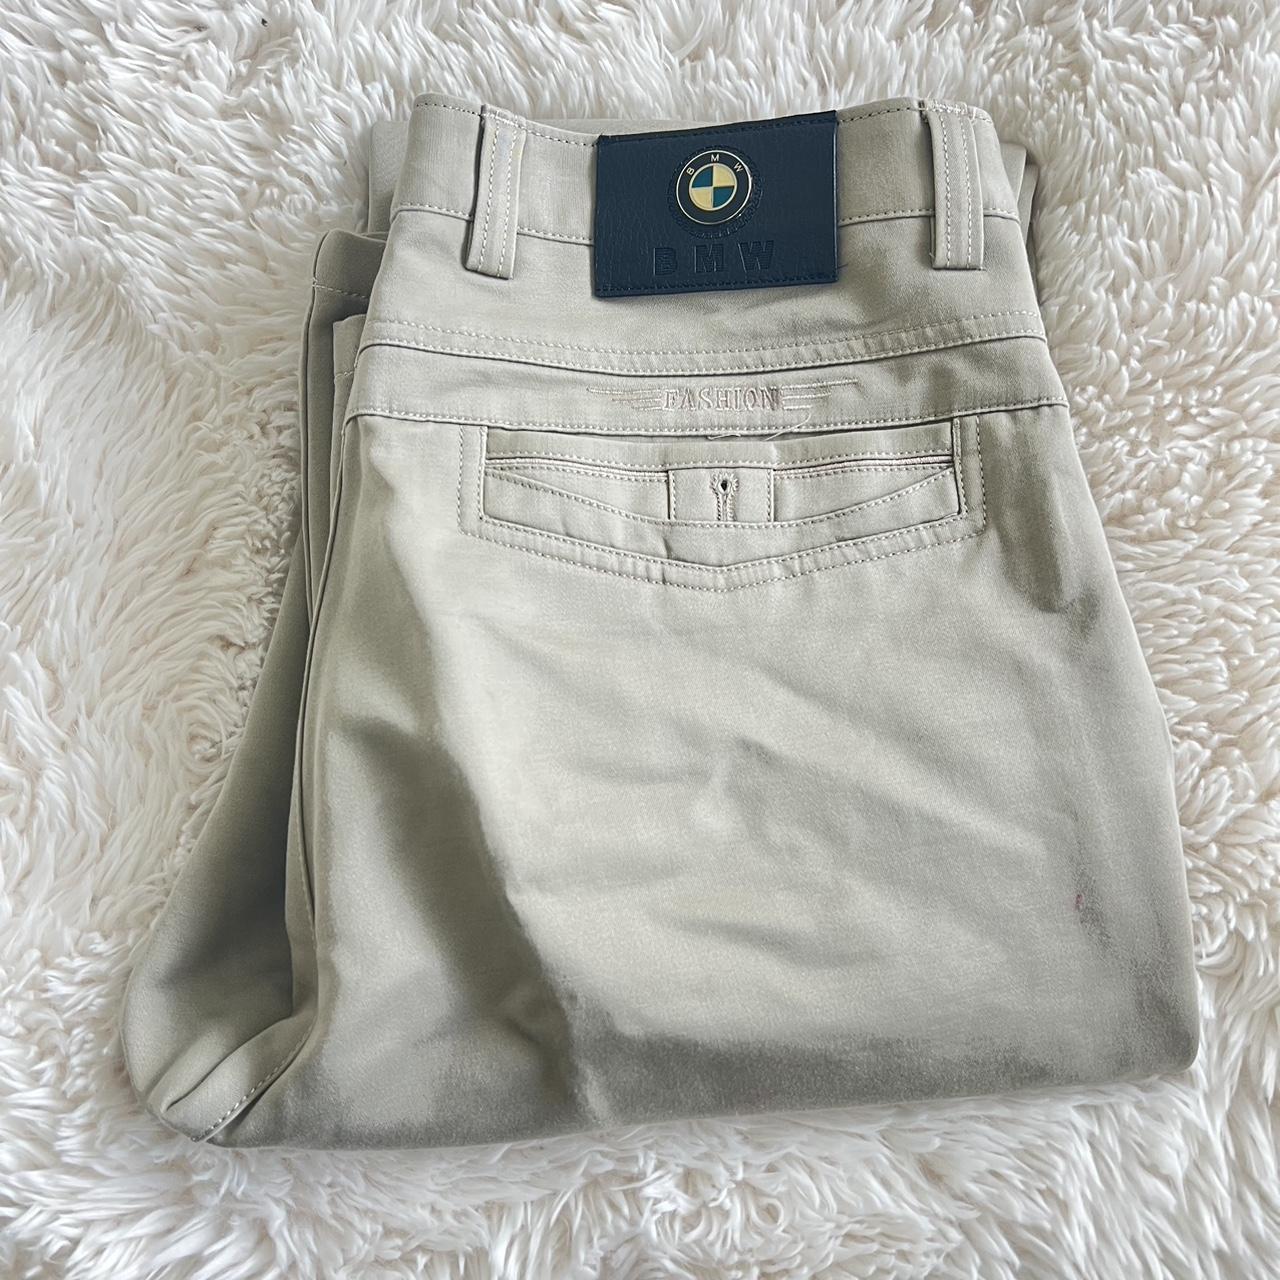 Urban Outfitters Men's Trousers | Depop